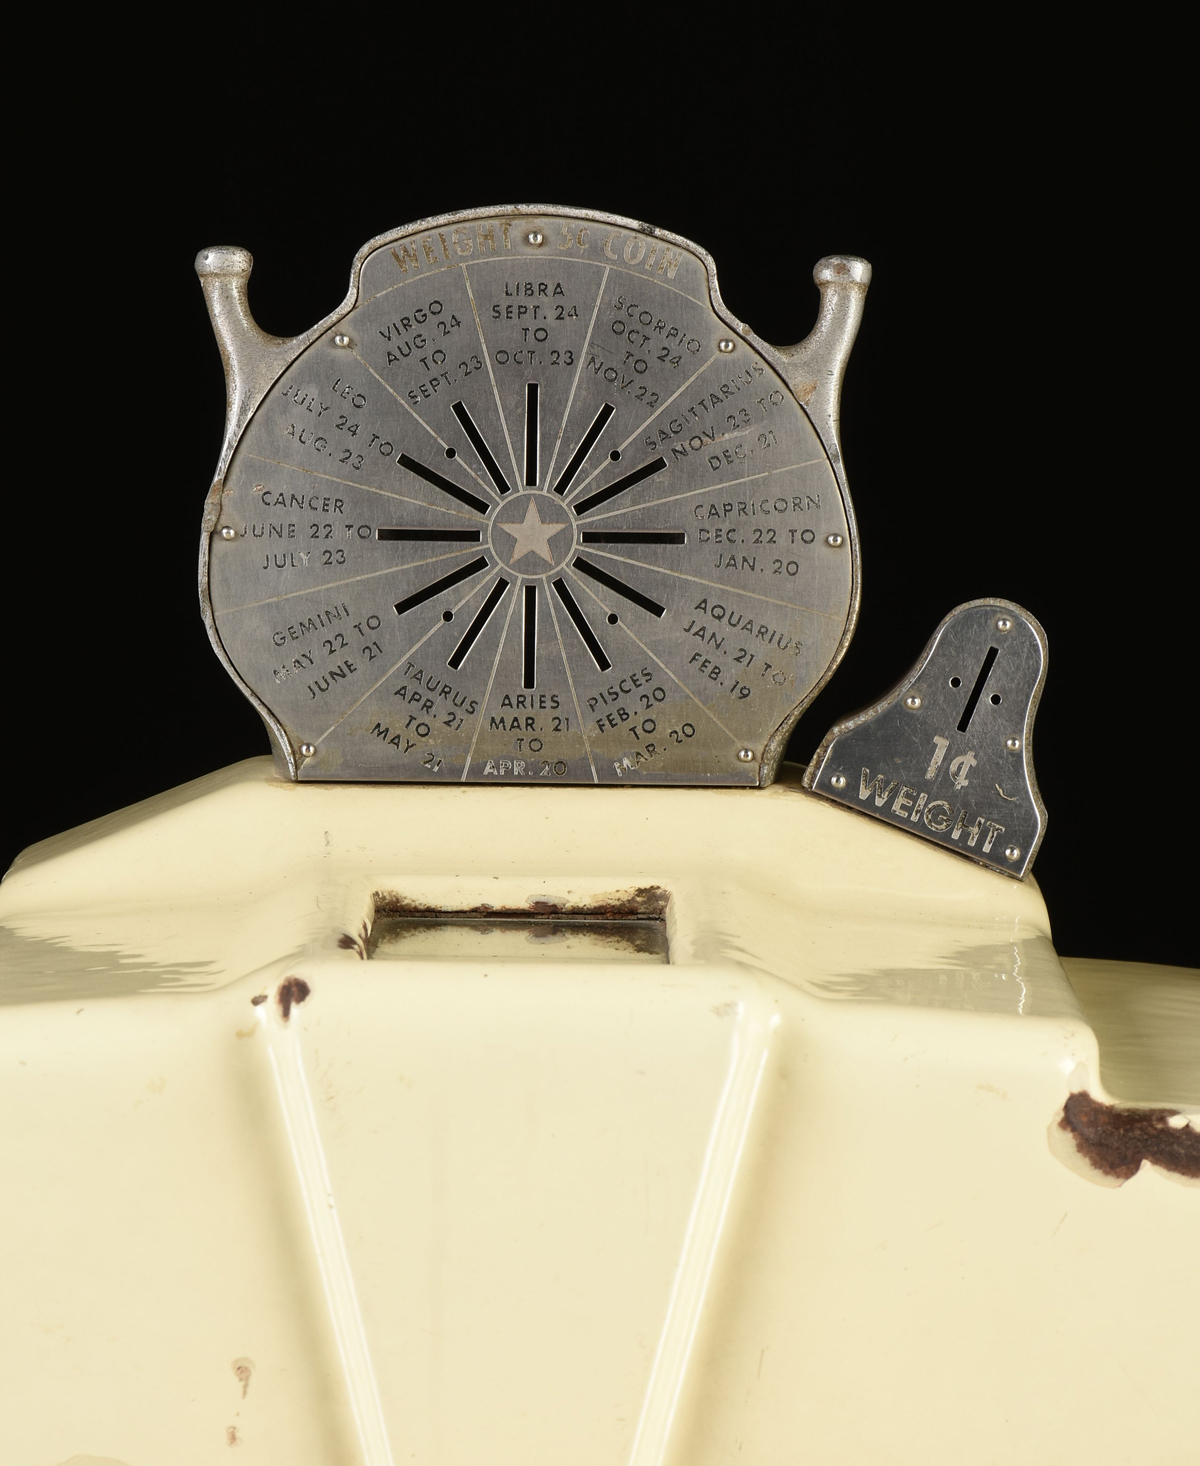 AN AMERICAN SCALE MANUFACTURING CO. FORTUNE MODEL 300 "1¬¢ Weight-Horoscope & Weight 5¬¢," COIN - Image 5 of 9